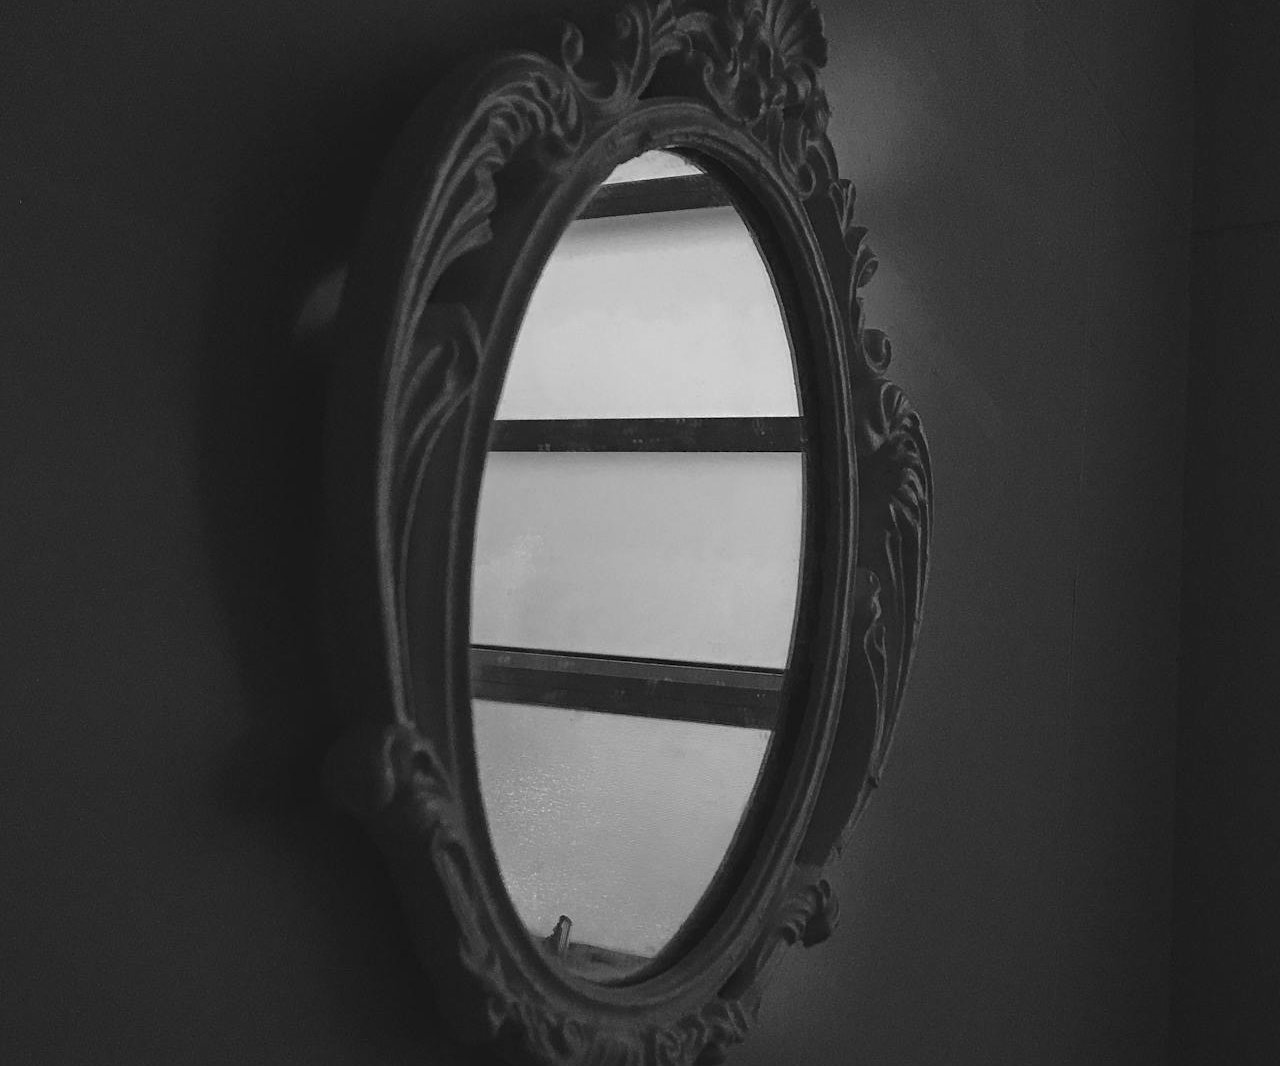 Grayscale Photo of Oval Mirror hanging on a wall